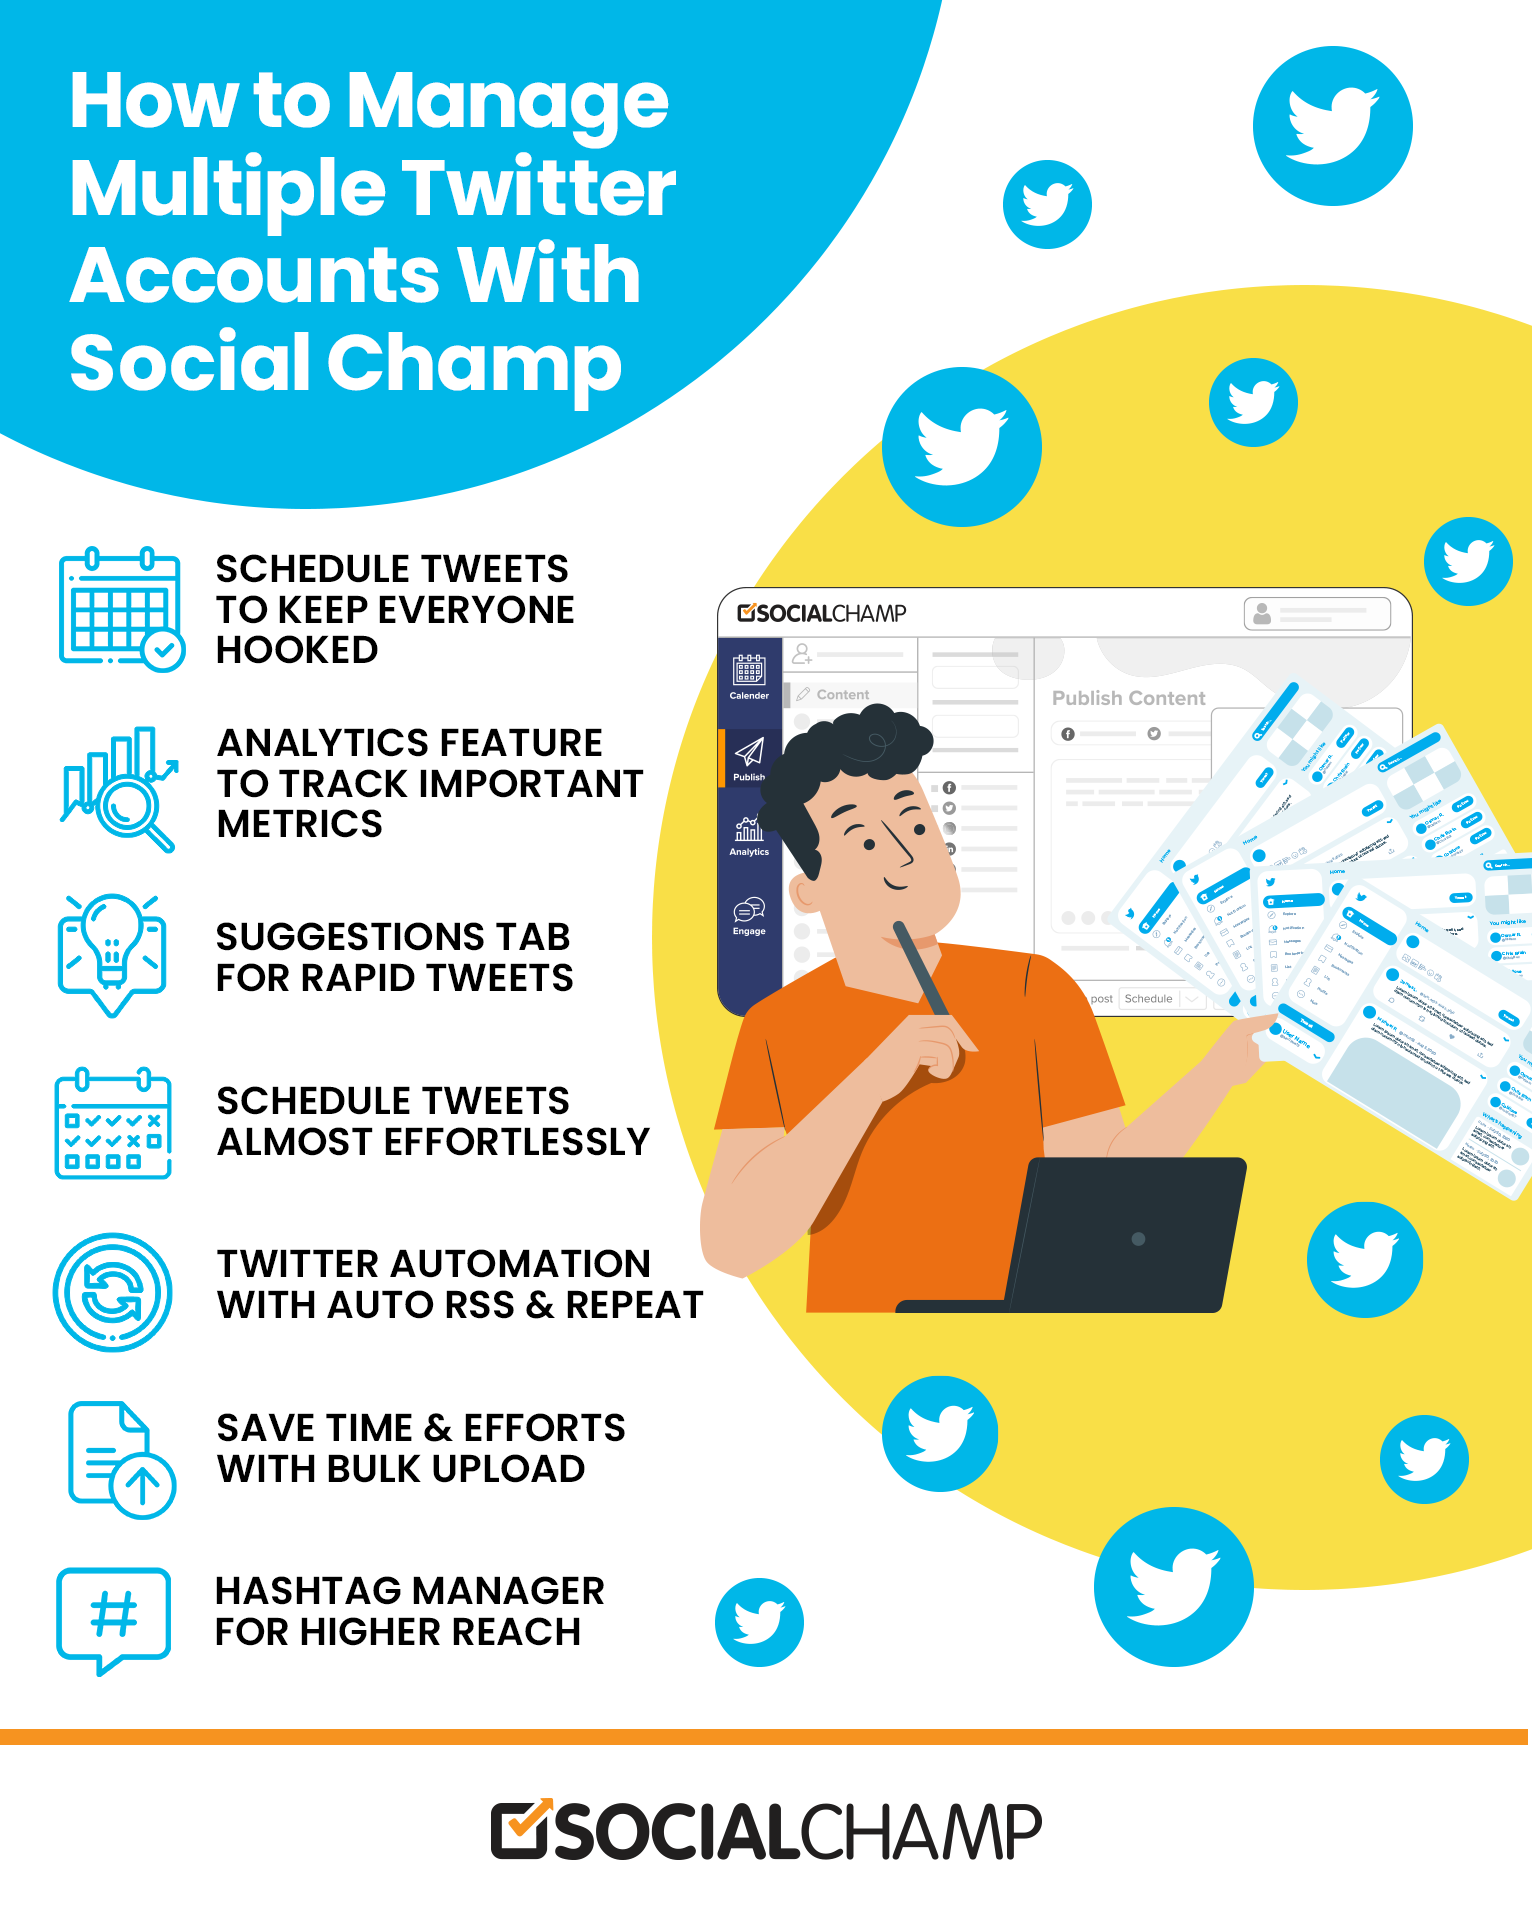 7 Tips to Manage Multiple Twitter Accounts